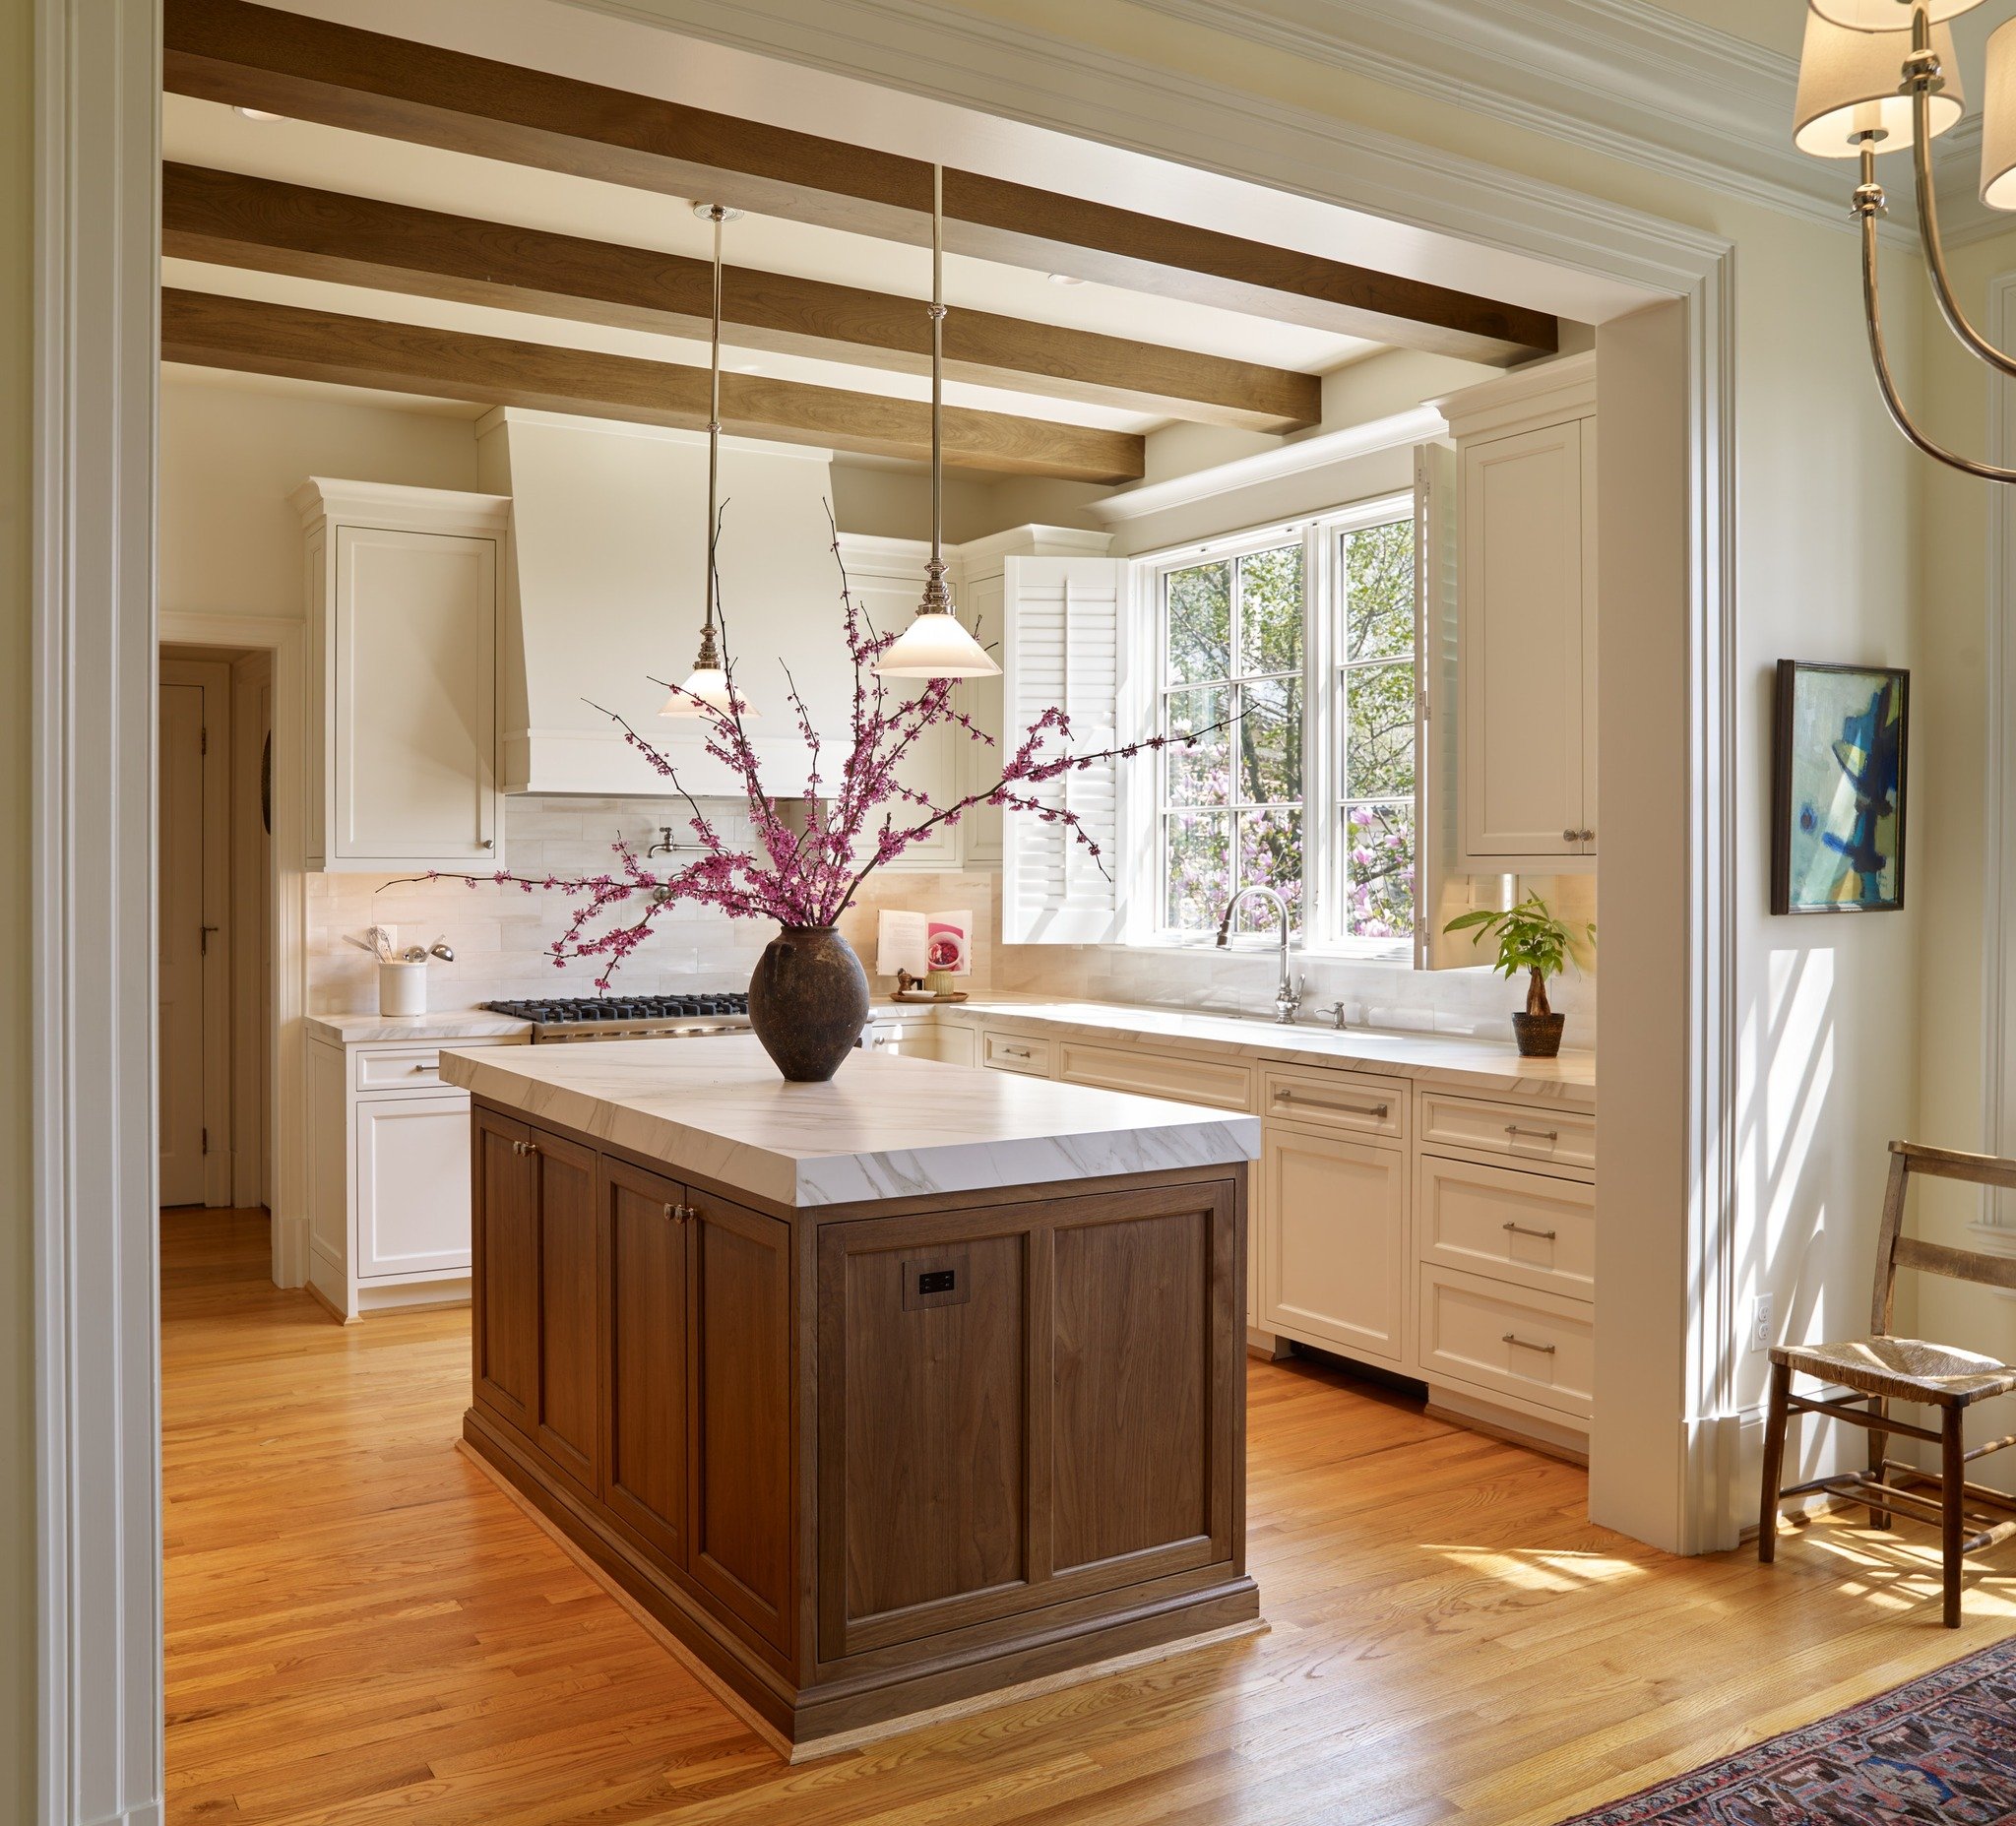 Spring is in the Air in #washingtondc !🌸
This custom kitchen renovation features a paneled  #walnutisland and fine tuned #walnutbeams,  The built up #porcelaincountertop grounds the center of the space.
.
.
.
Design by: #studio360llc 
Build by: @bow